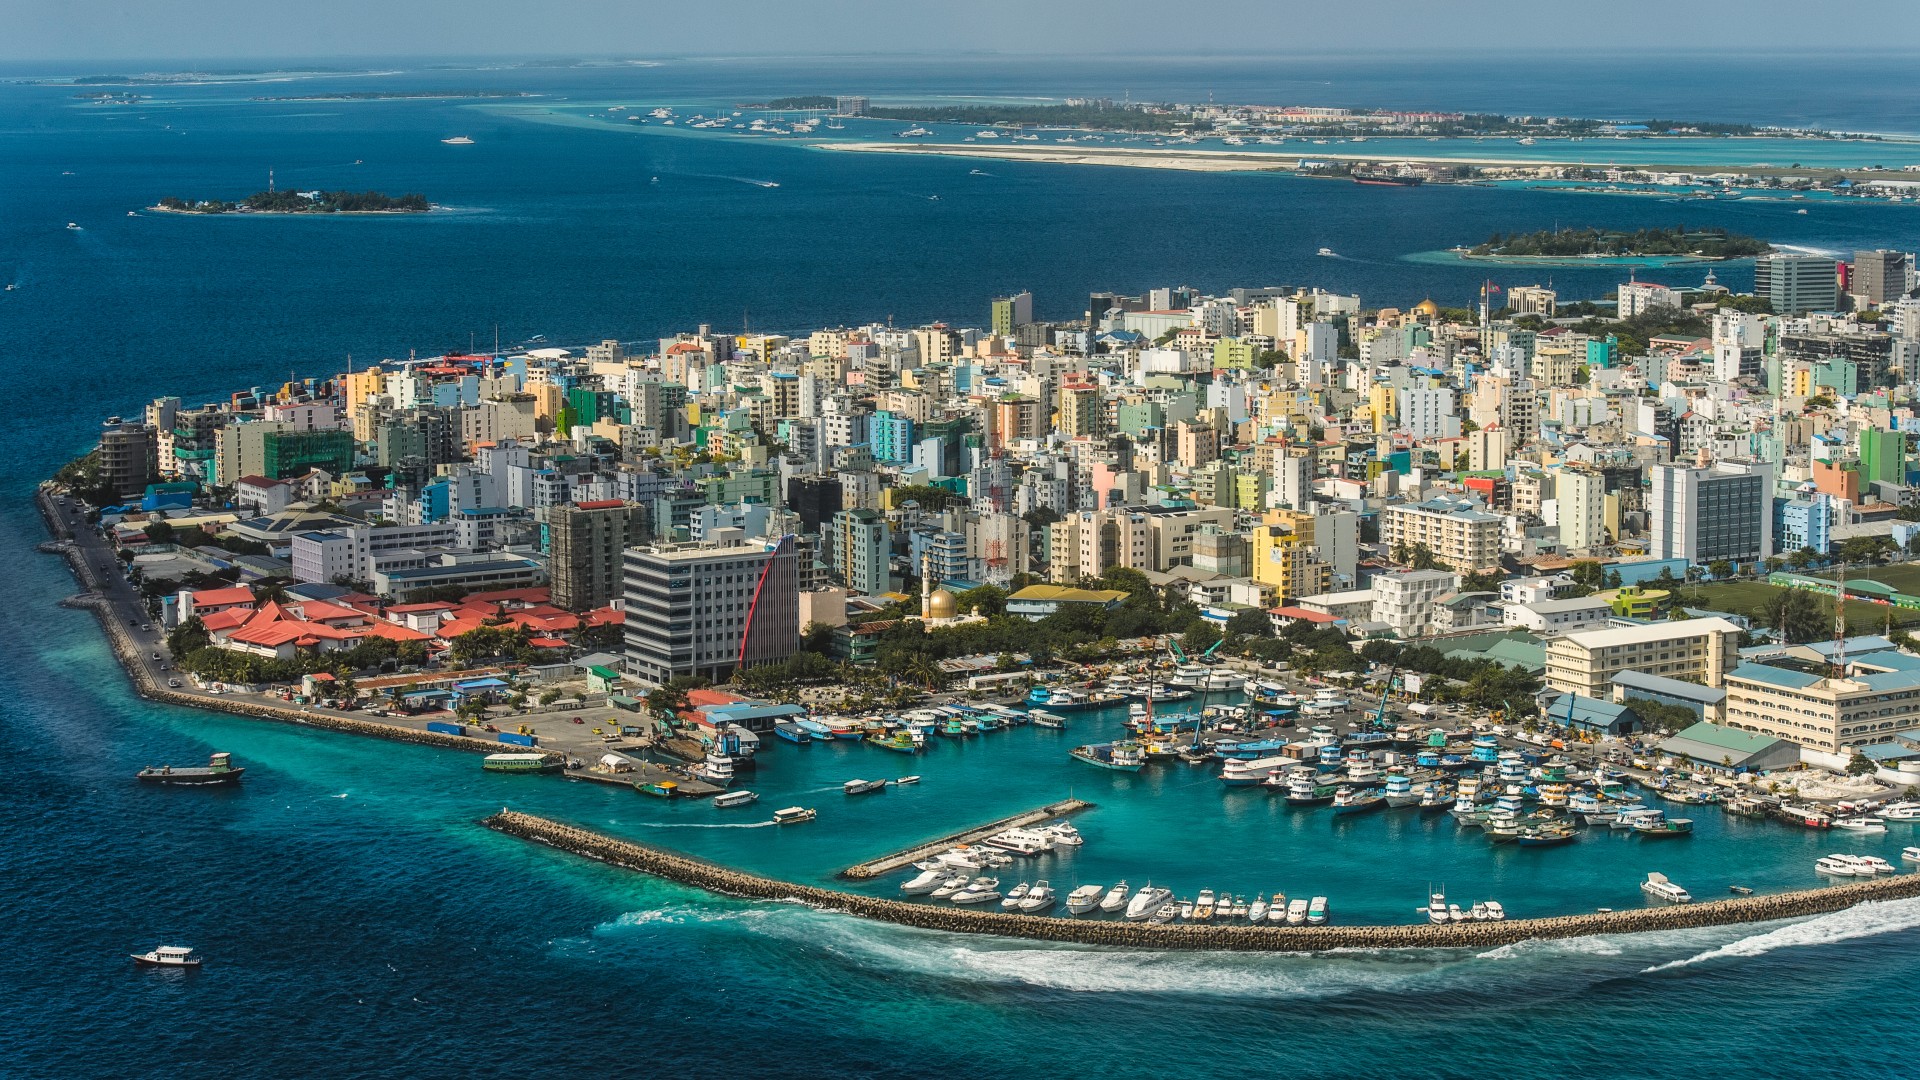 A view of Male, the Maldivian capital. niromaks via Getty Images